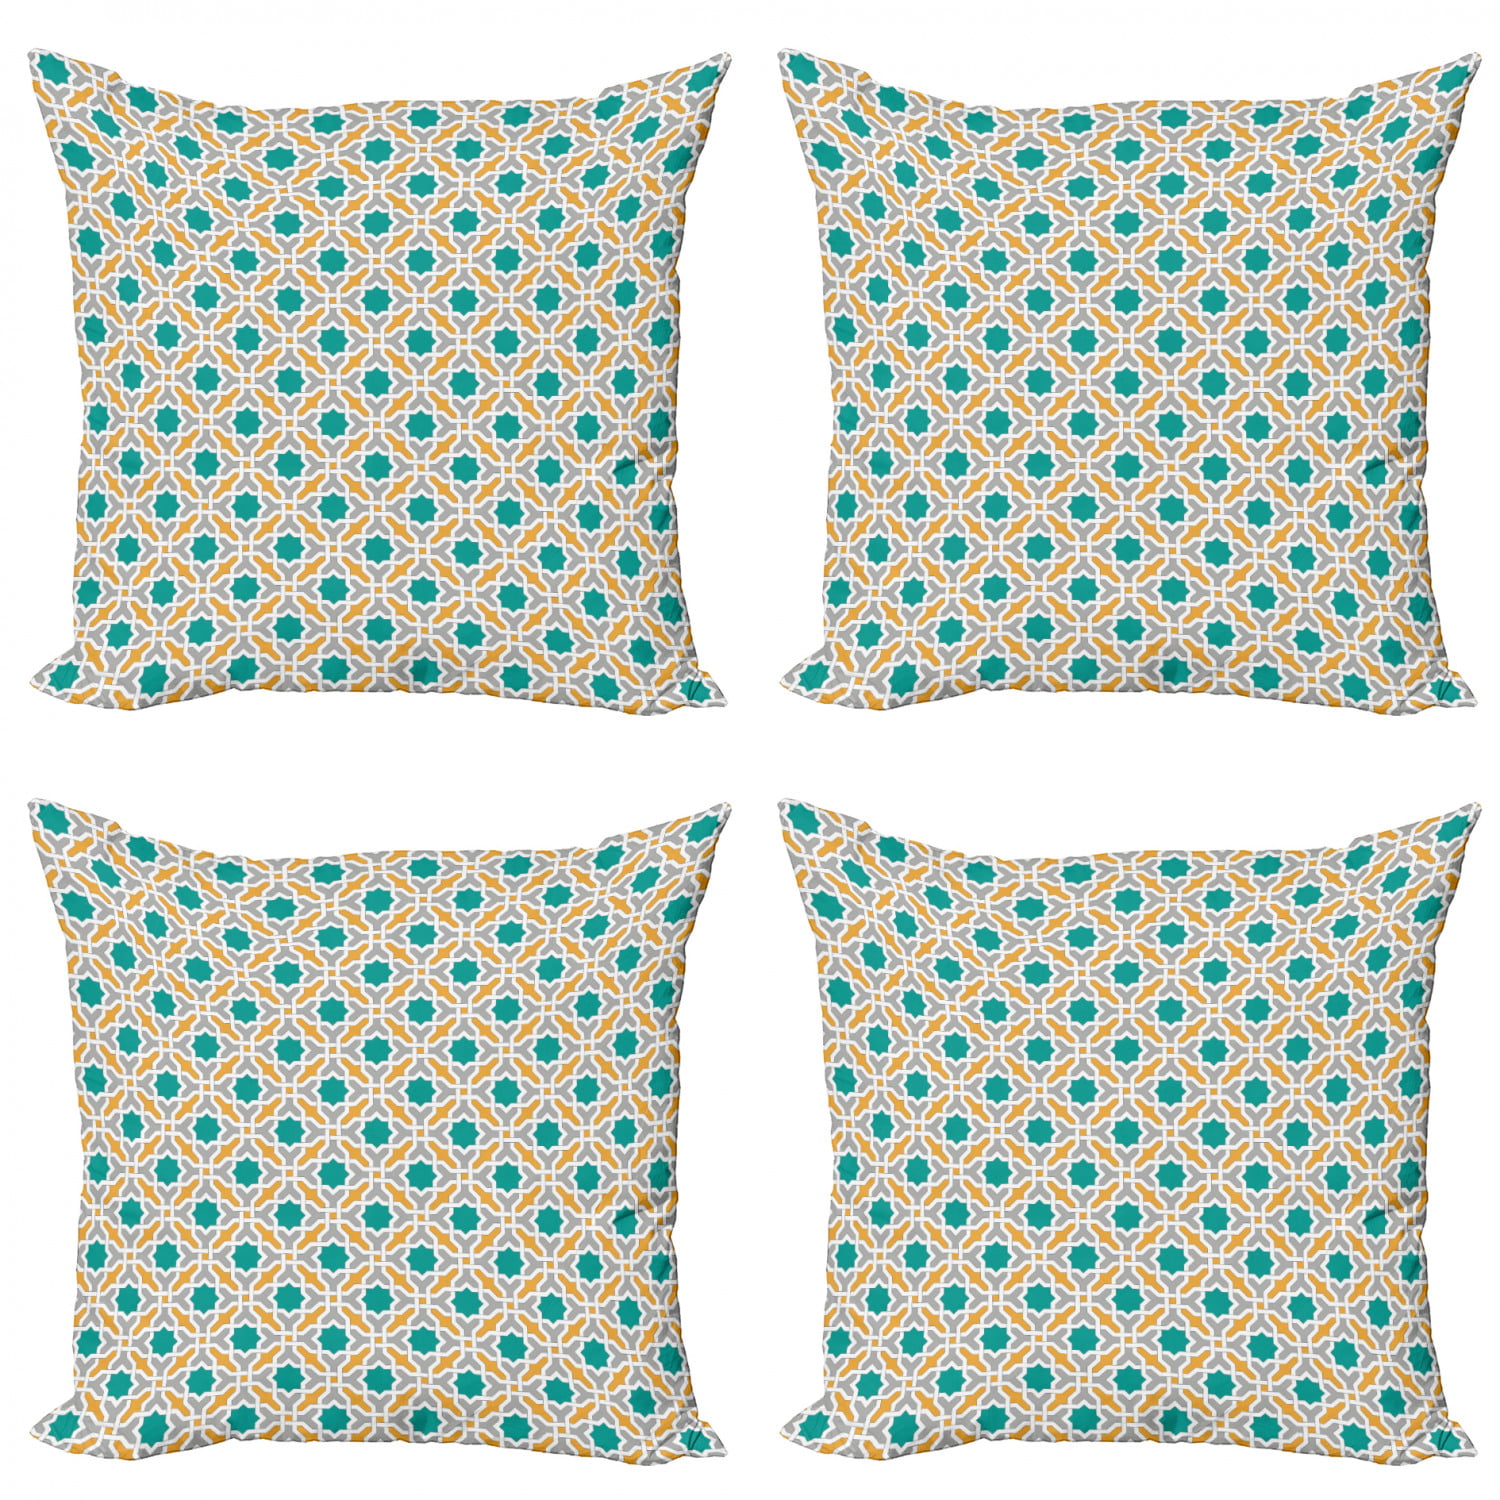 Abstract Geometric Pattern Eastern Oriental Symmetric Design Print Mustard Teal and Grey Ambesonne Teal Throw Pillow Cushion Case Pack of 4 18 Modern Accent Double-Sided Digital Printing 